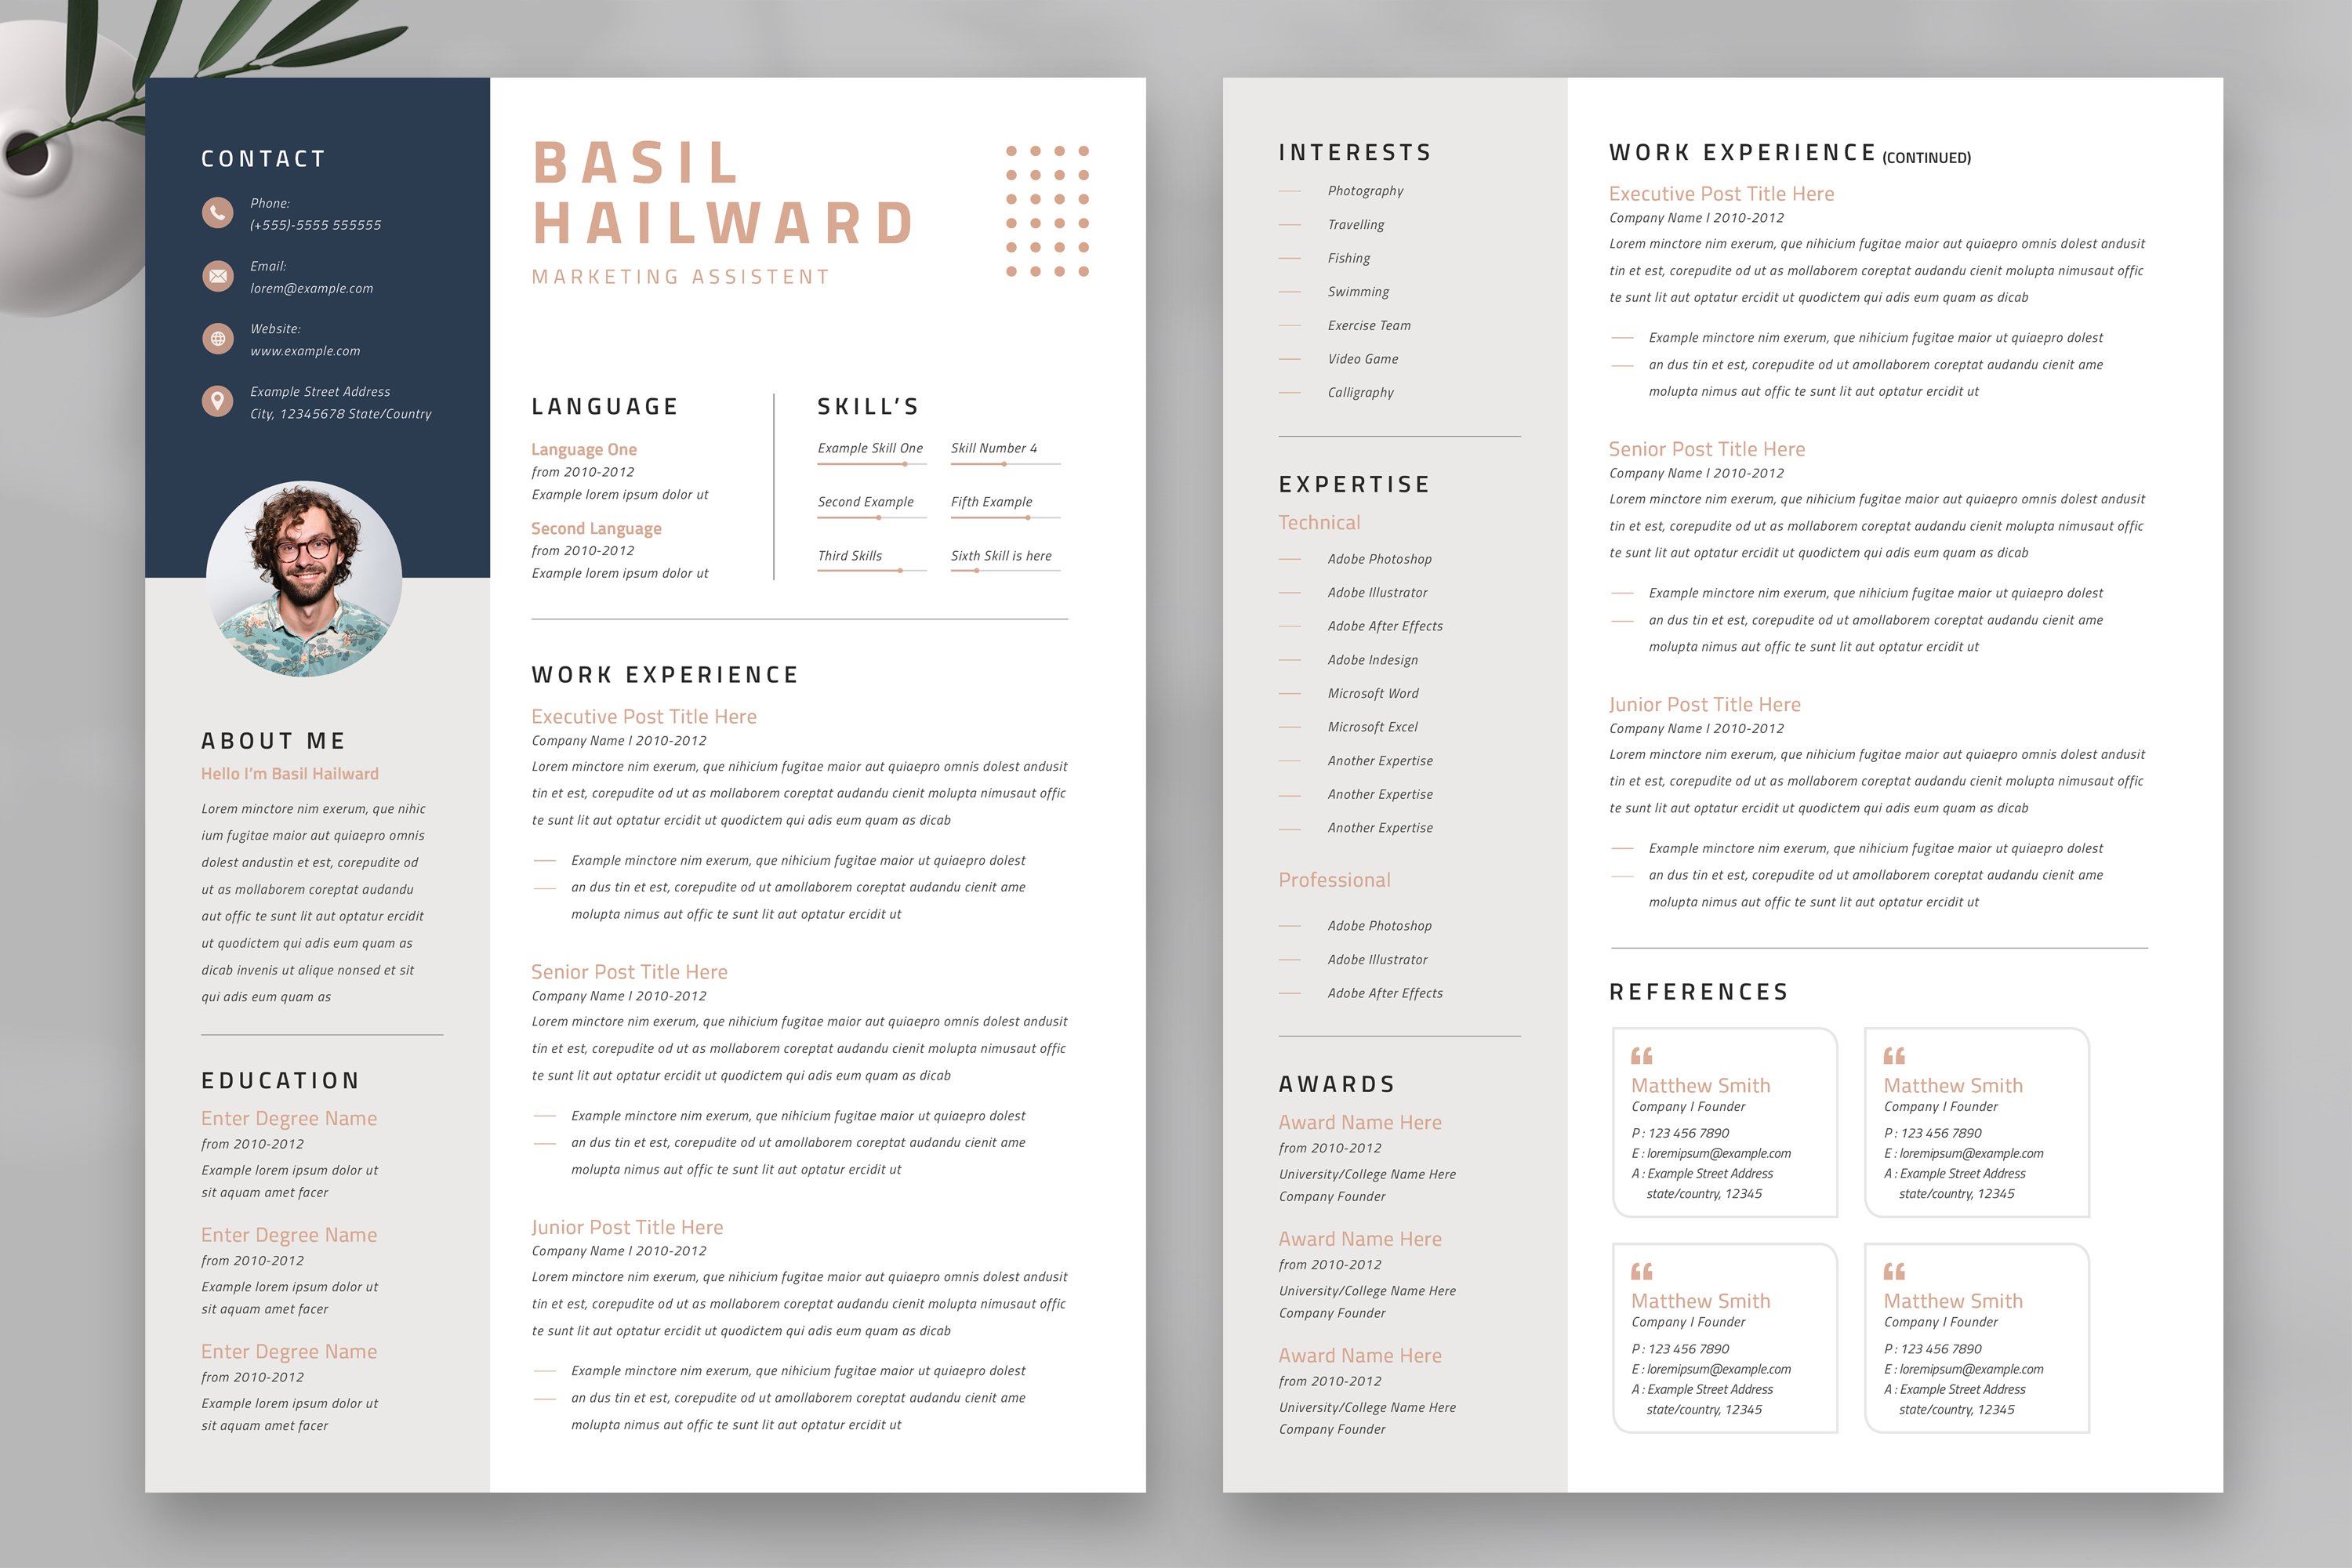 Canva Resume/CV preview image.